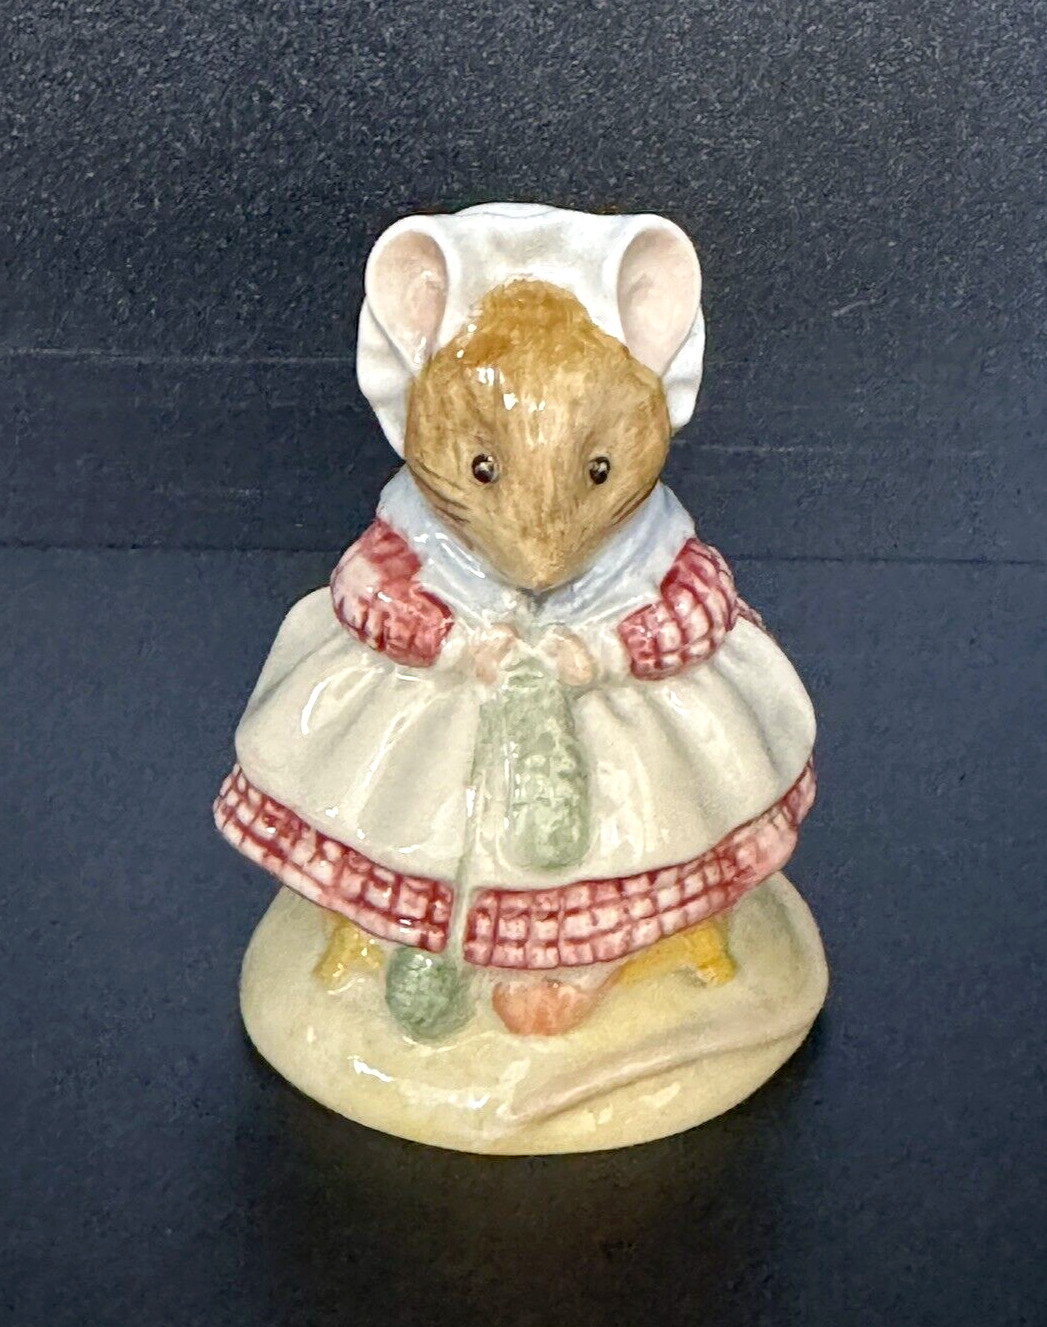 Beswick Beatrix Potter The Old Woman Who Lived in a Shoe Knitting Figurine 1983